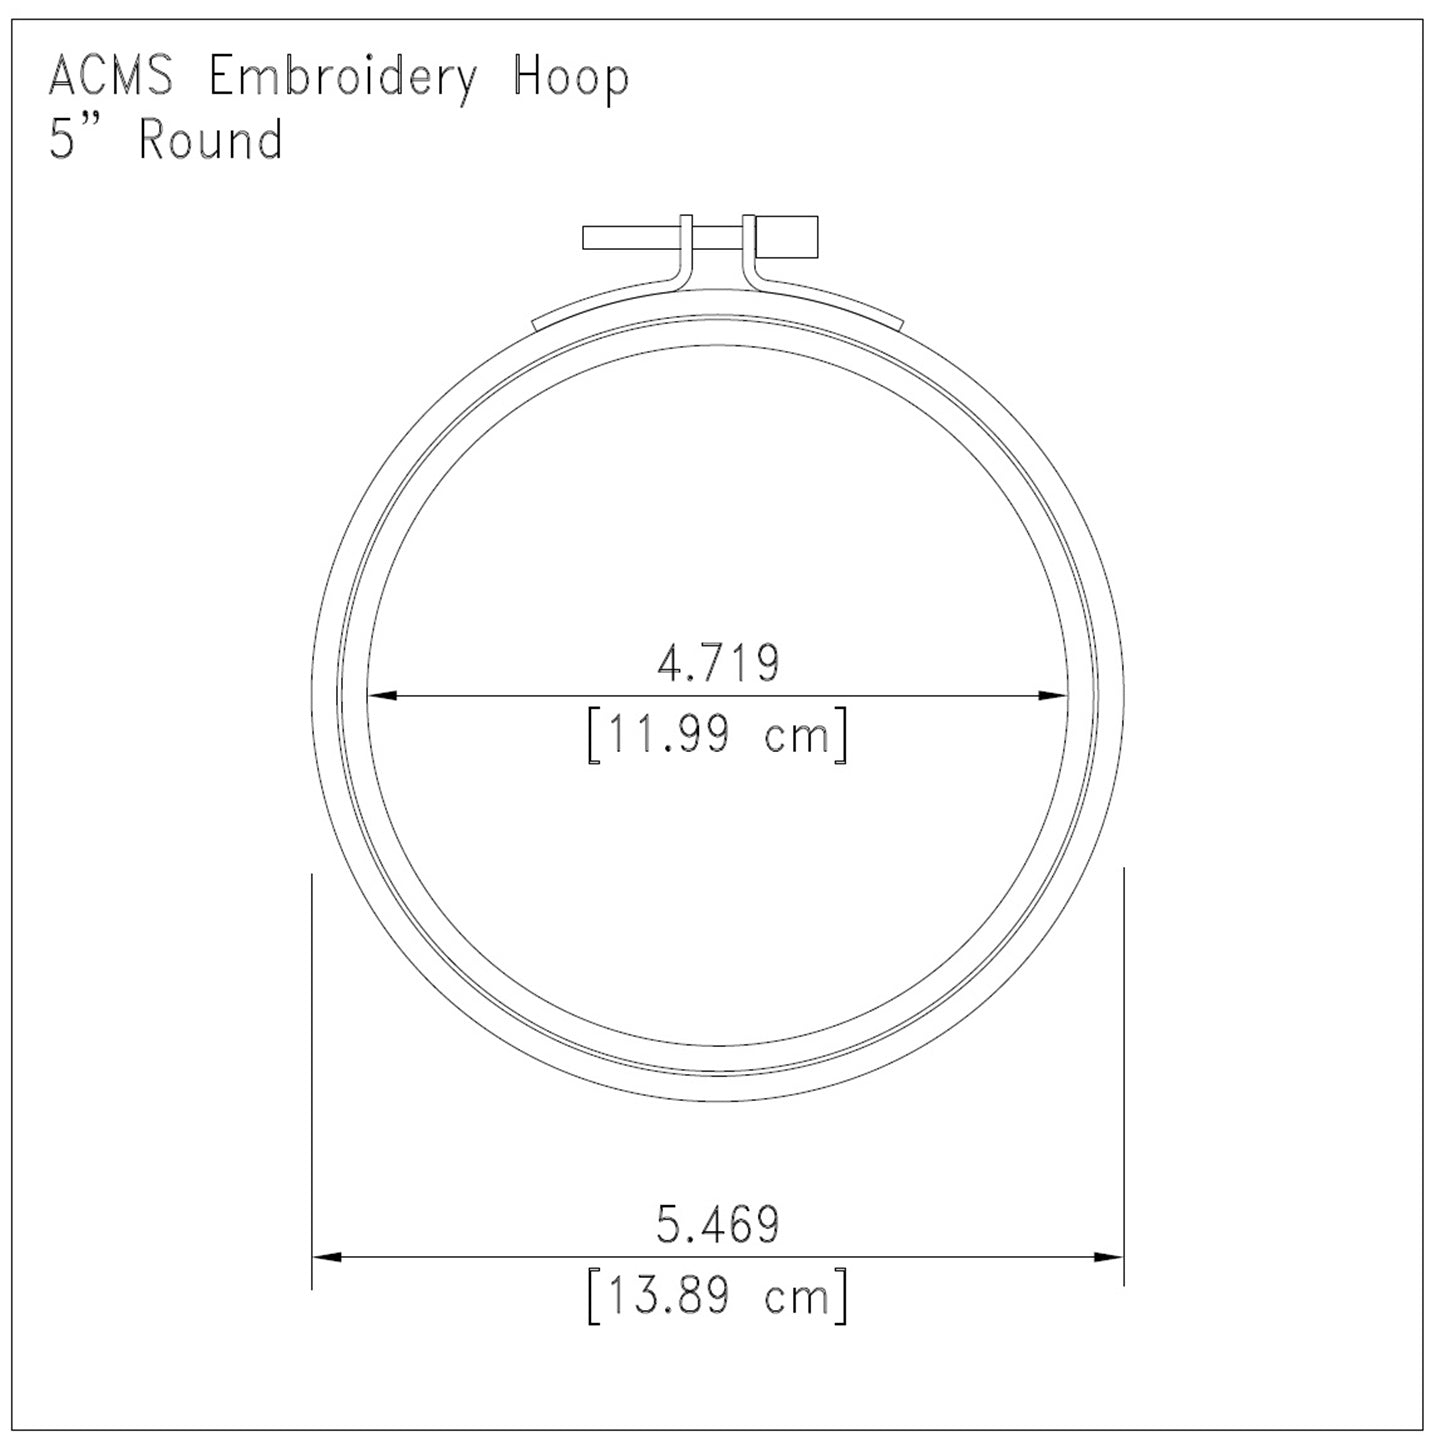 5" Round Embroidery Hoops